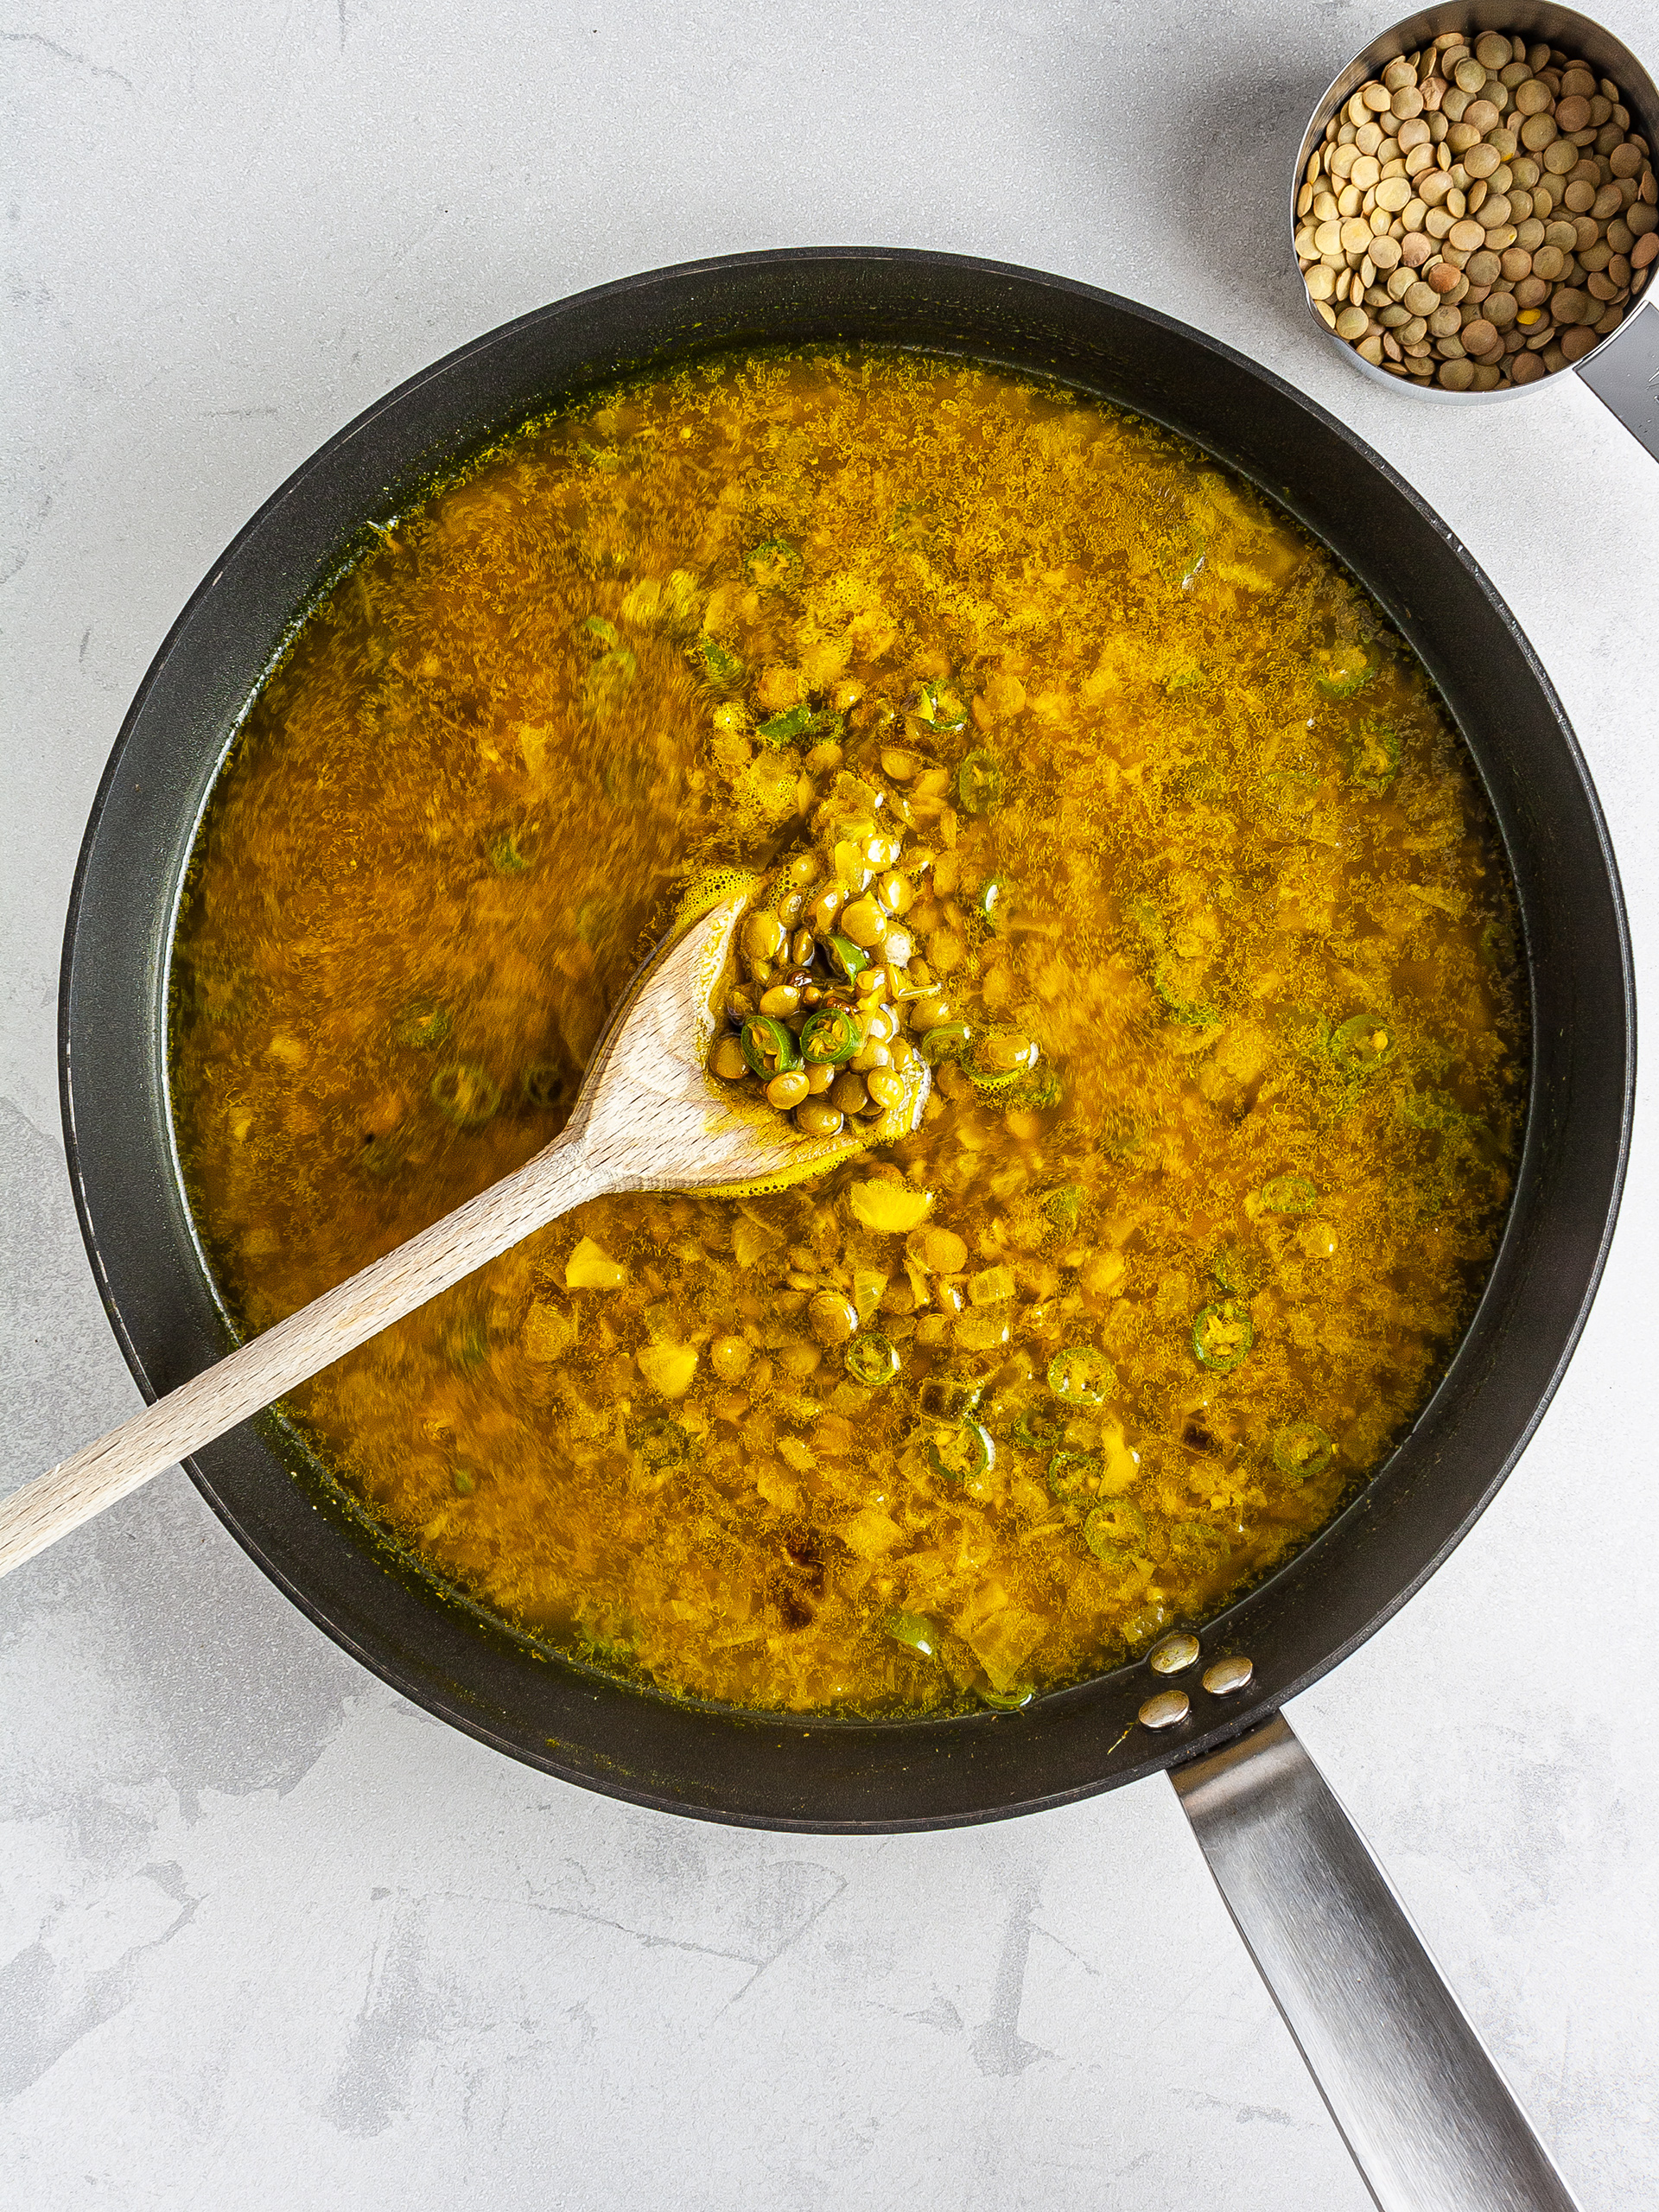 Lentils and turmeric broth in a skillet